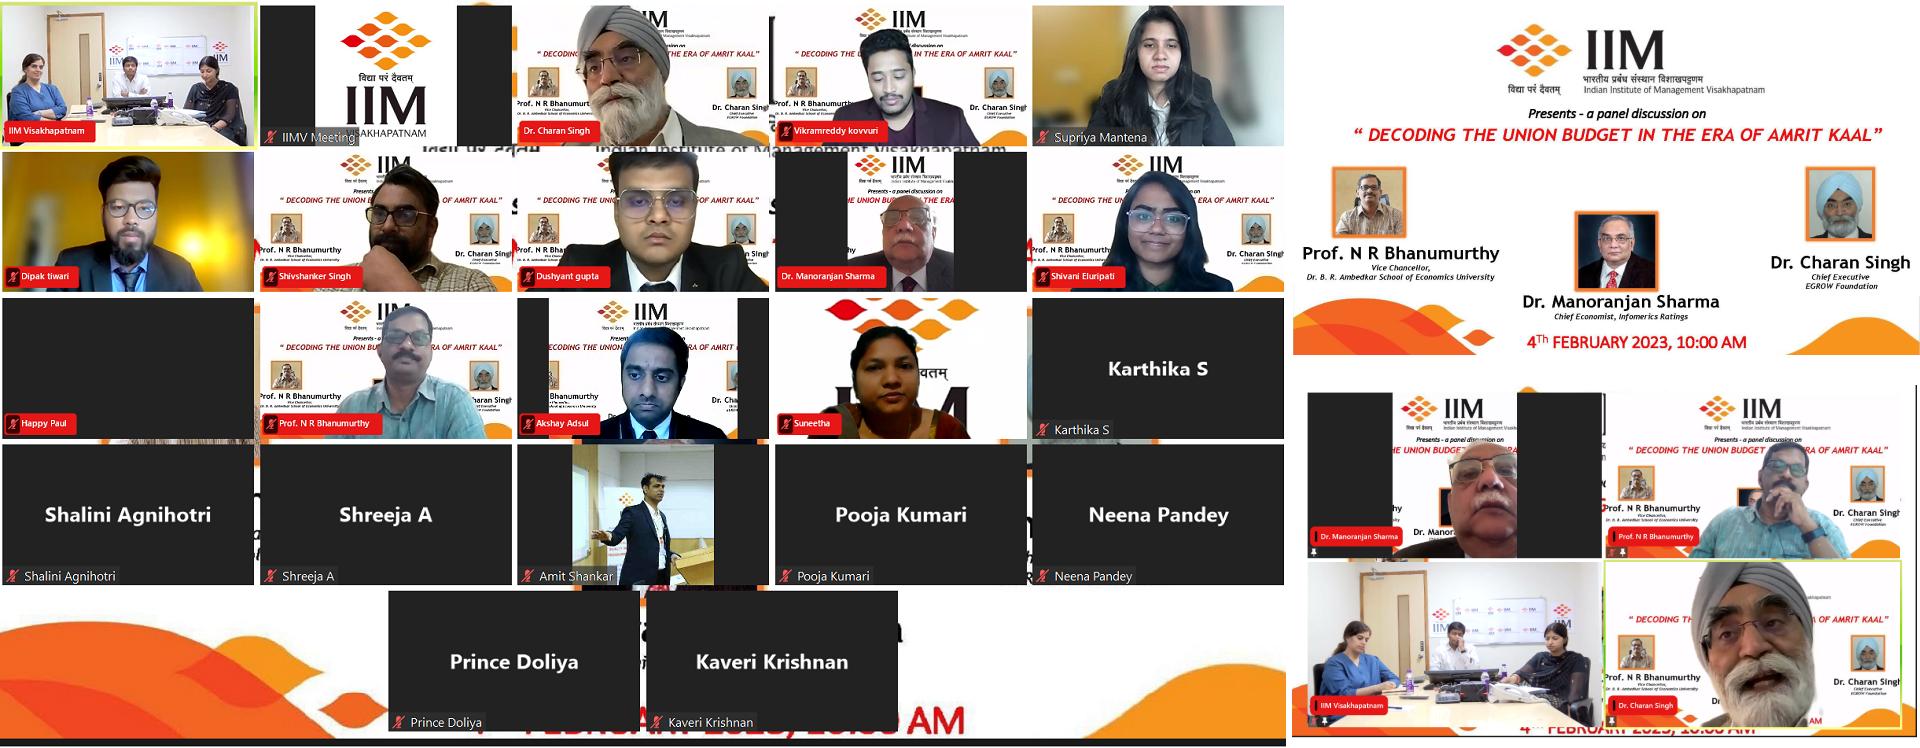 Panel Discussion on “Decoding the Union Budget in the Era of Amrit Kaal’ on 04.02.2023 in virtual mode